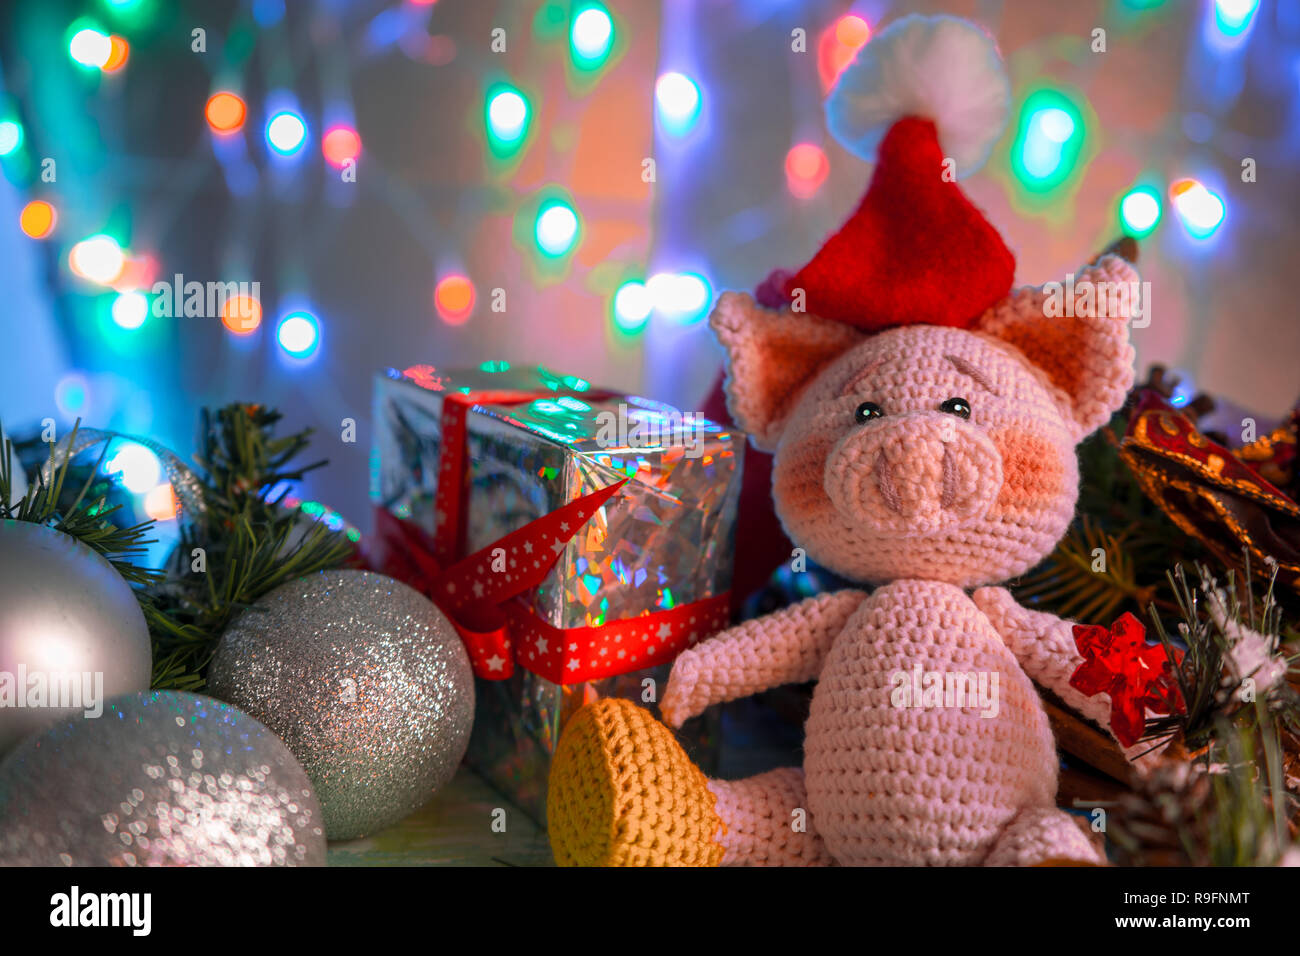 Funny greeting card with new year 2019. Pink pig with xmas balls and gift on background with illumination. Stock Photo